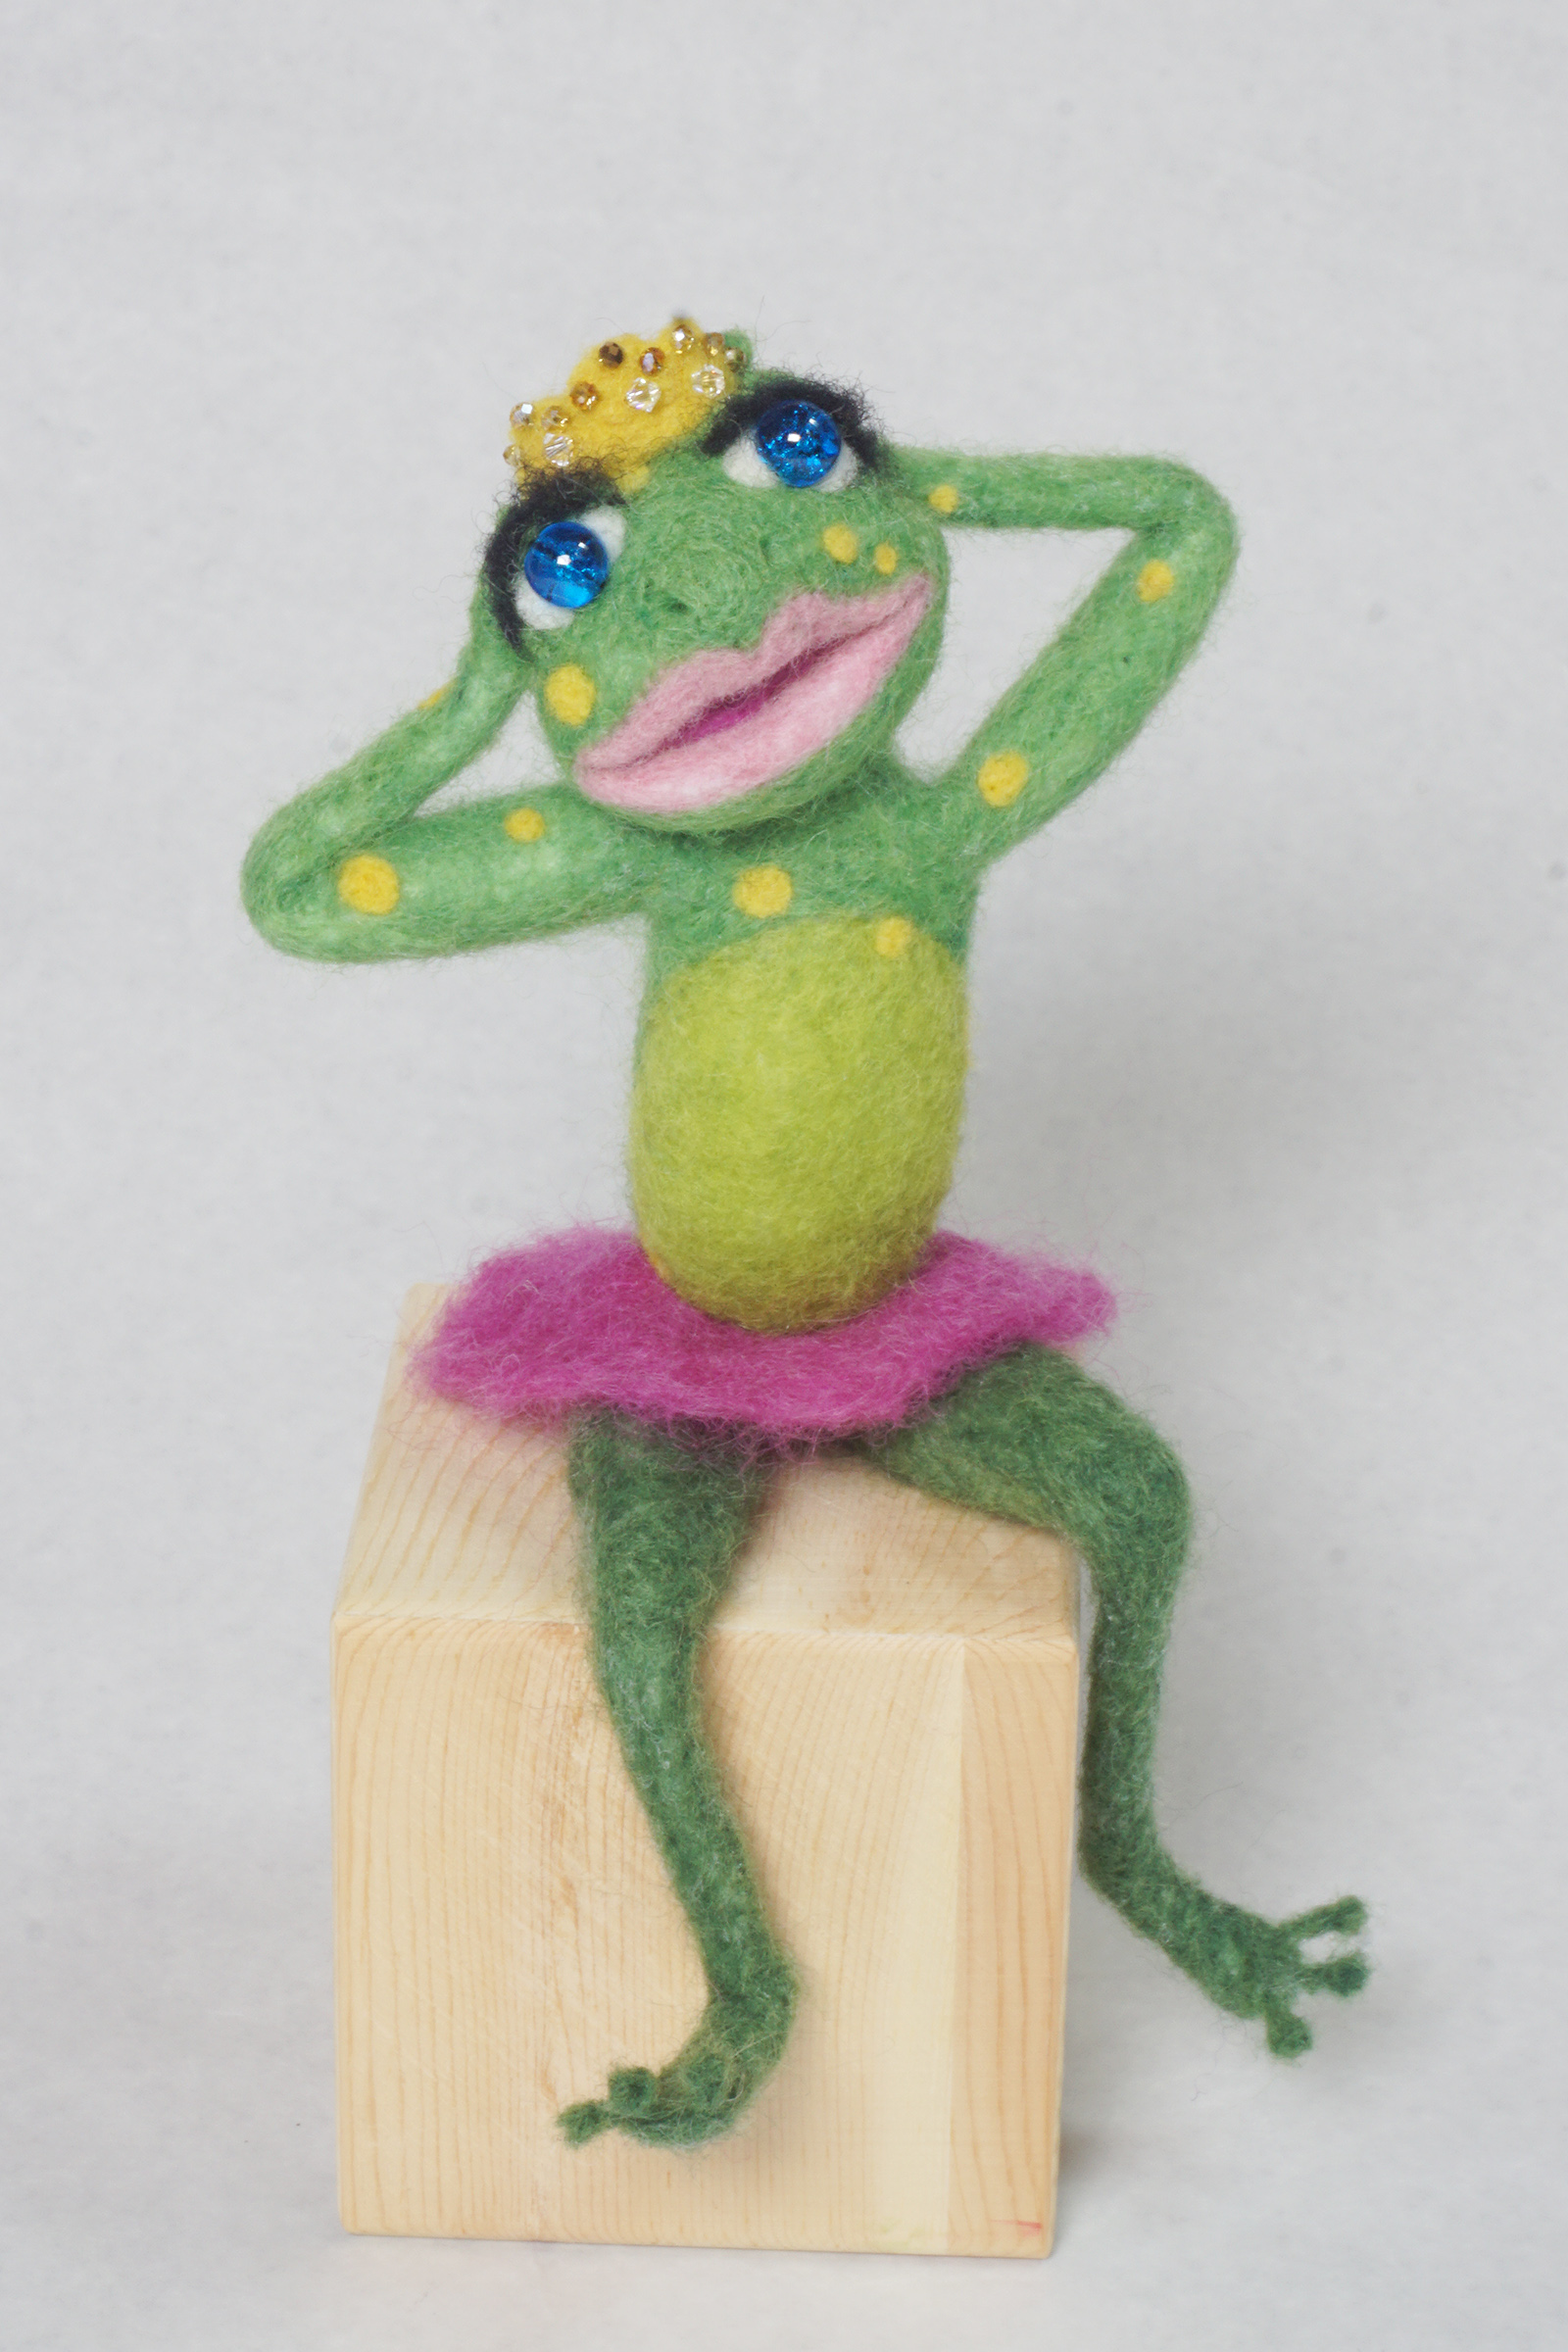 sculpture of an anthropomorphic frog princess.